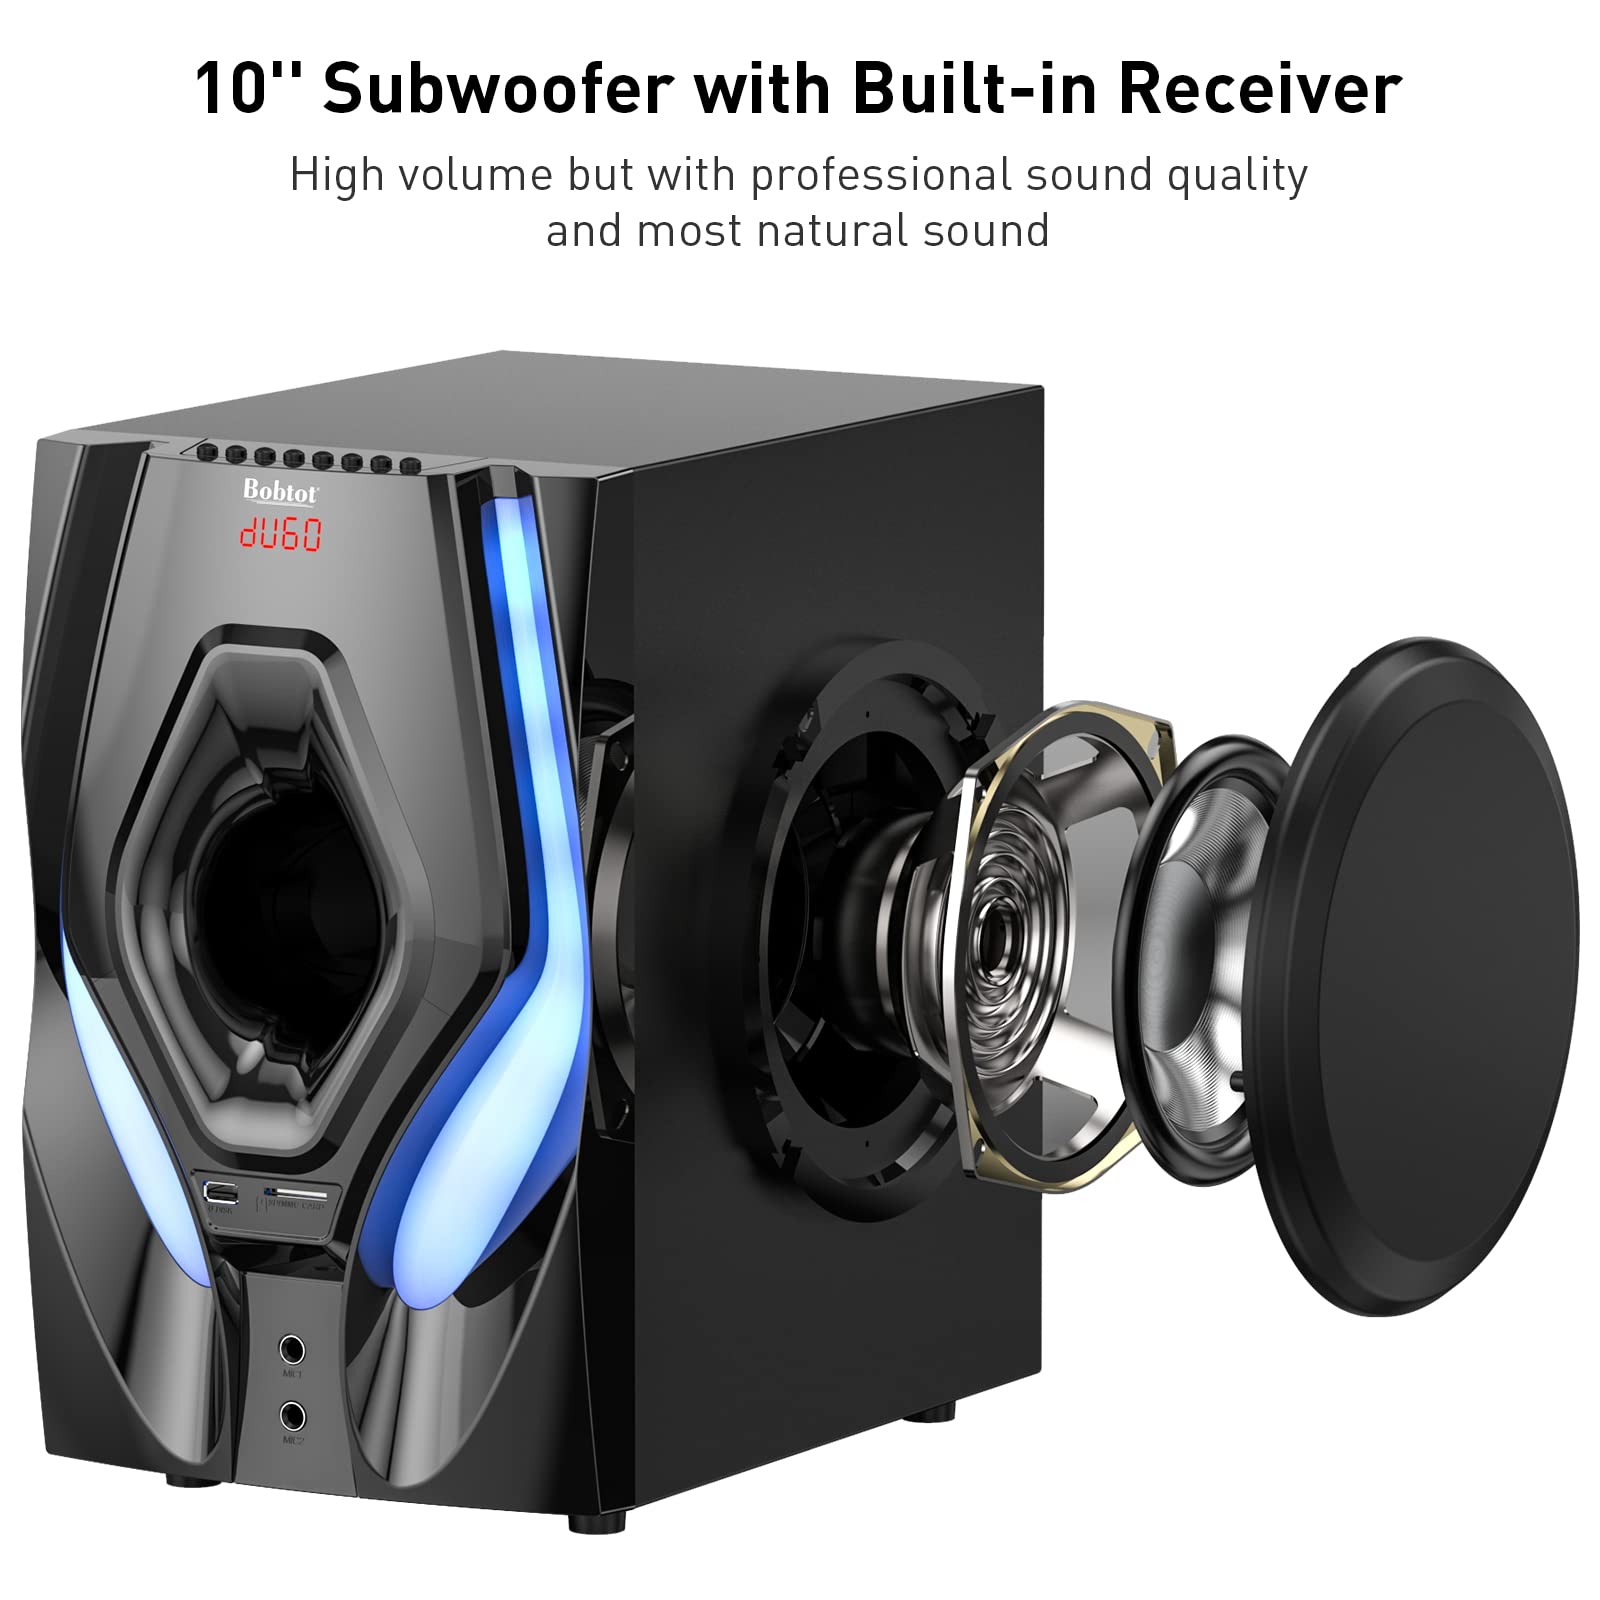 Bobtot Home Theater Systems Surround Sound Speakers - 1200 Watts 10 inch Subwoofer 5.1/2.1 Channel Home Audio Stereo System with HDMI ARC Optical Bluetooth Input for 4K TV Ultra HD AV DVD FM Radio USB